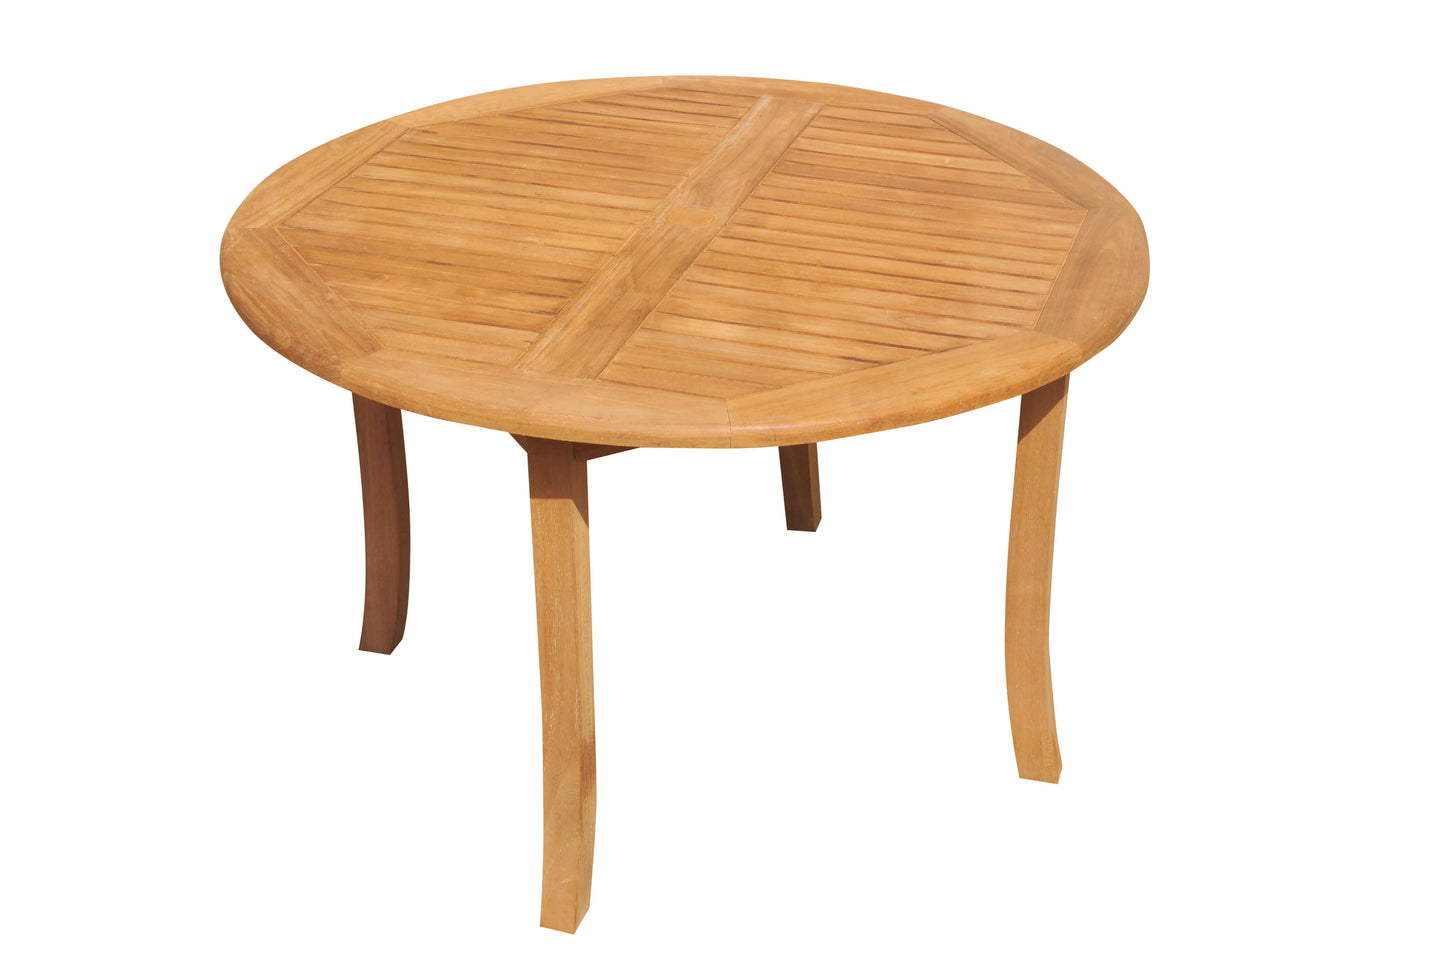 48" Fixed Round Dining Table